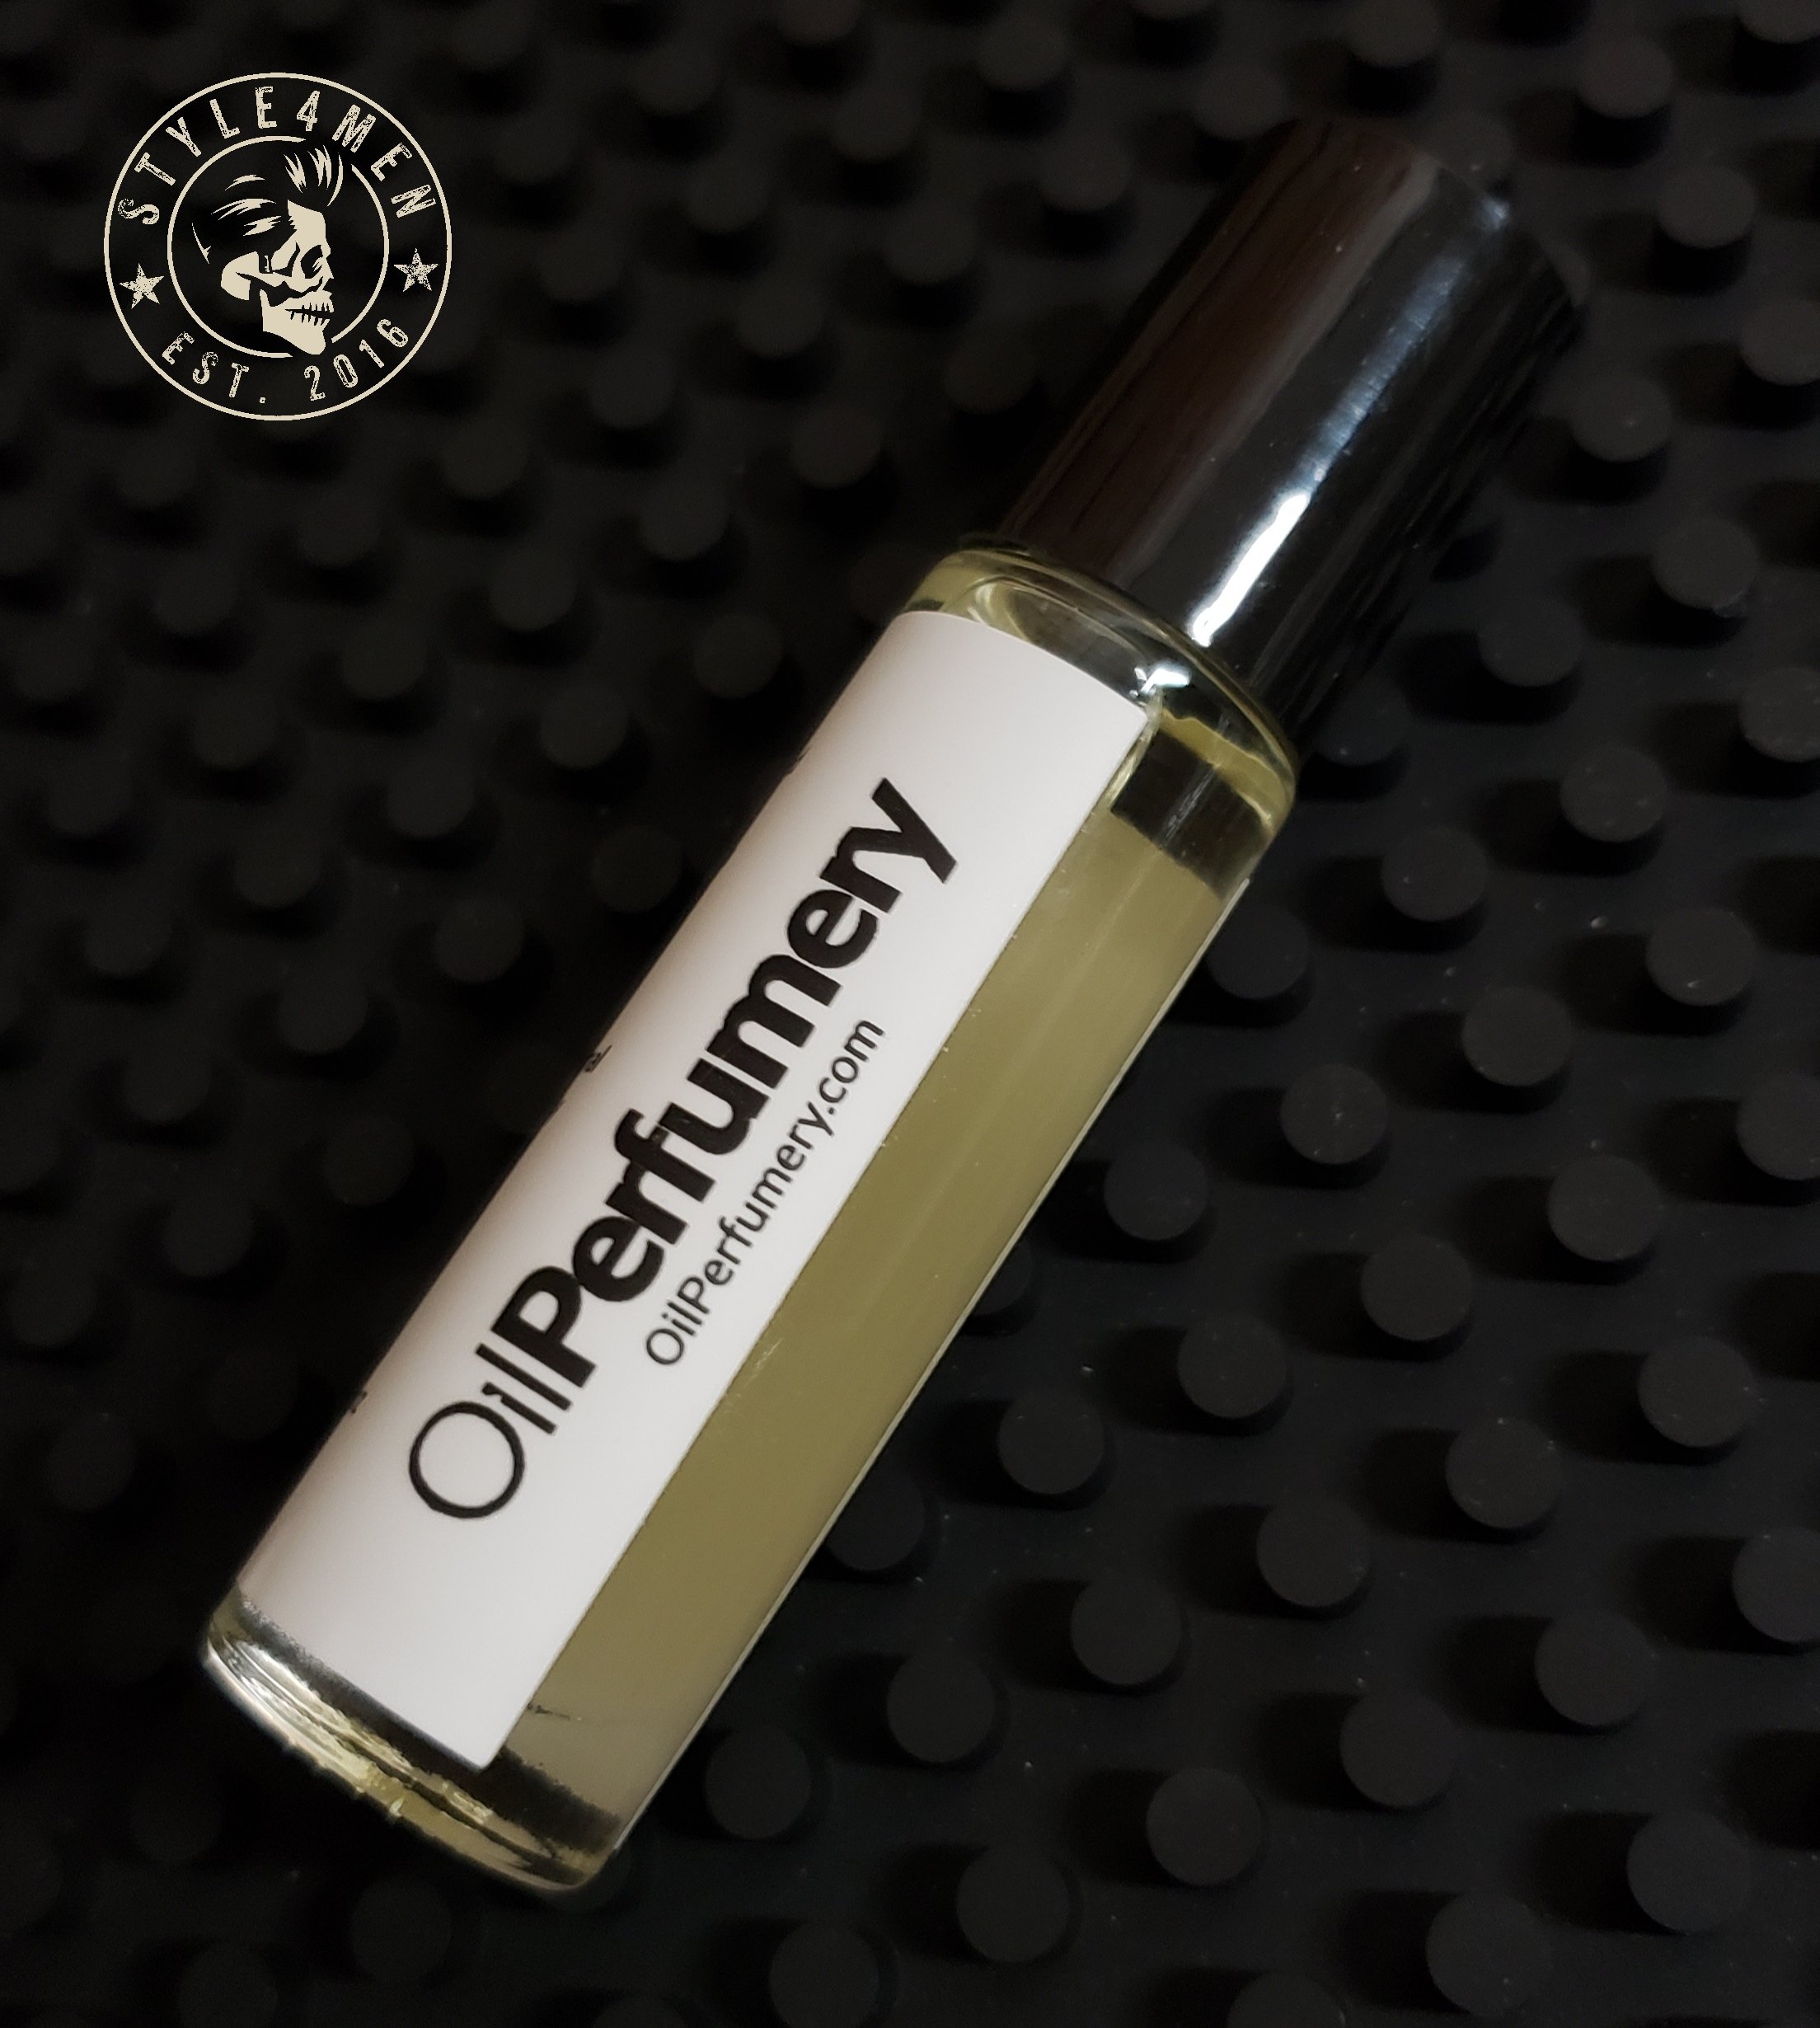 Exploring an “impression” fragrance of Creed Aventus by Oil Perfumery